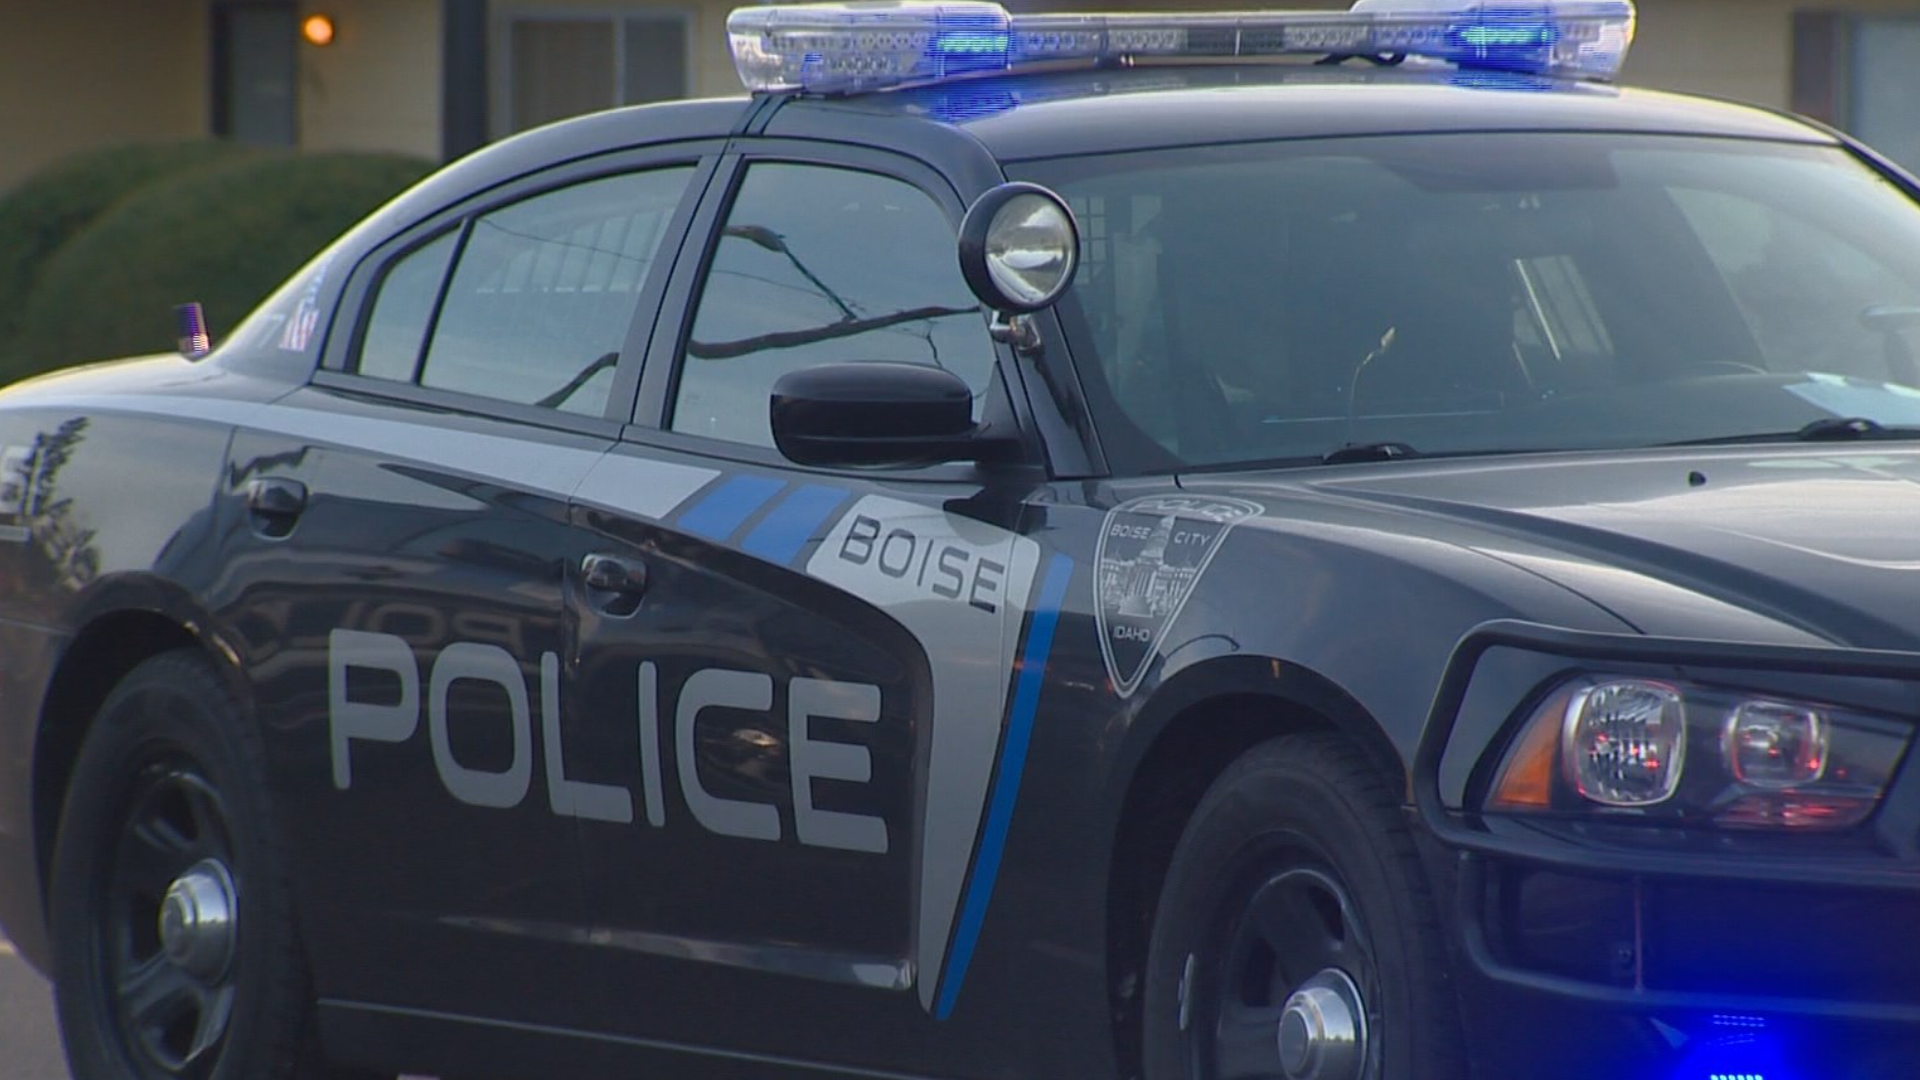 A Boise man was arrested Thursday for eluding officers in connection to a shooting on West Colonial Street. Boise Police are looking for others potentially involved.